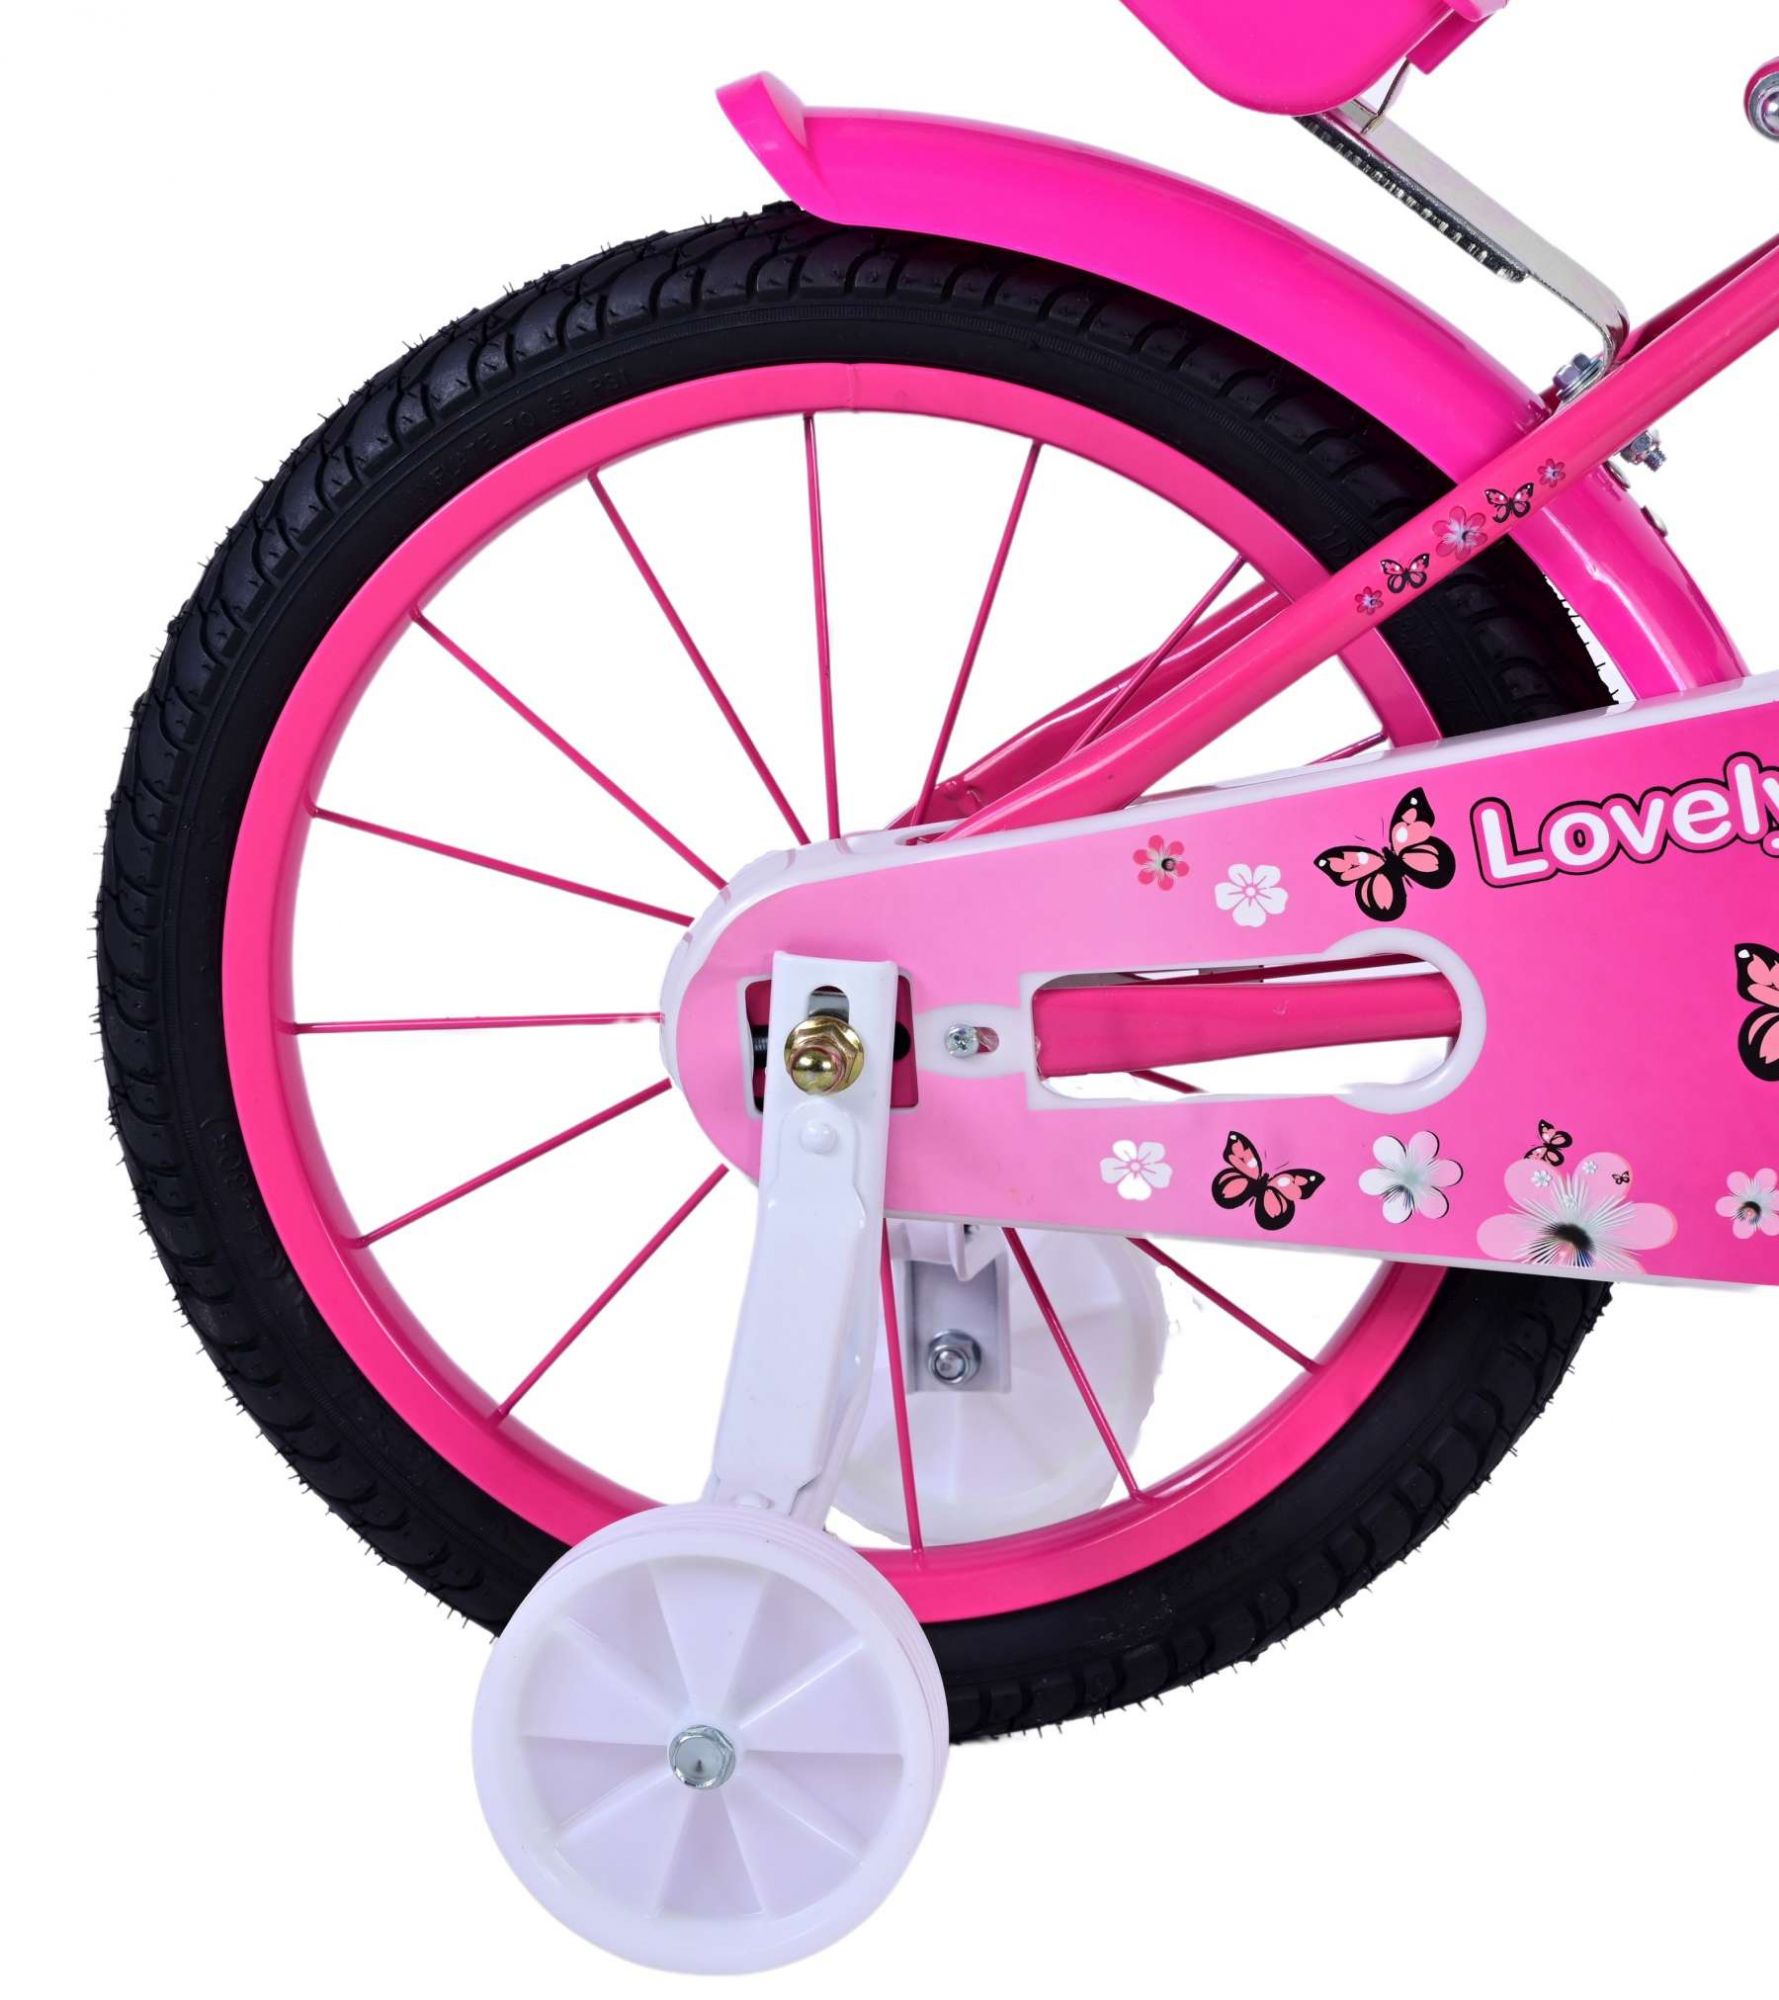 Volare_Lovely_kinderfiets_16_inch_-_3-W1800